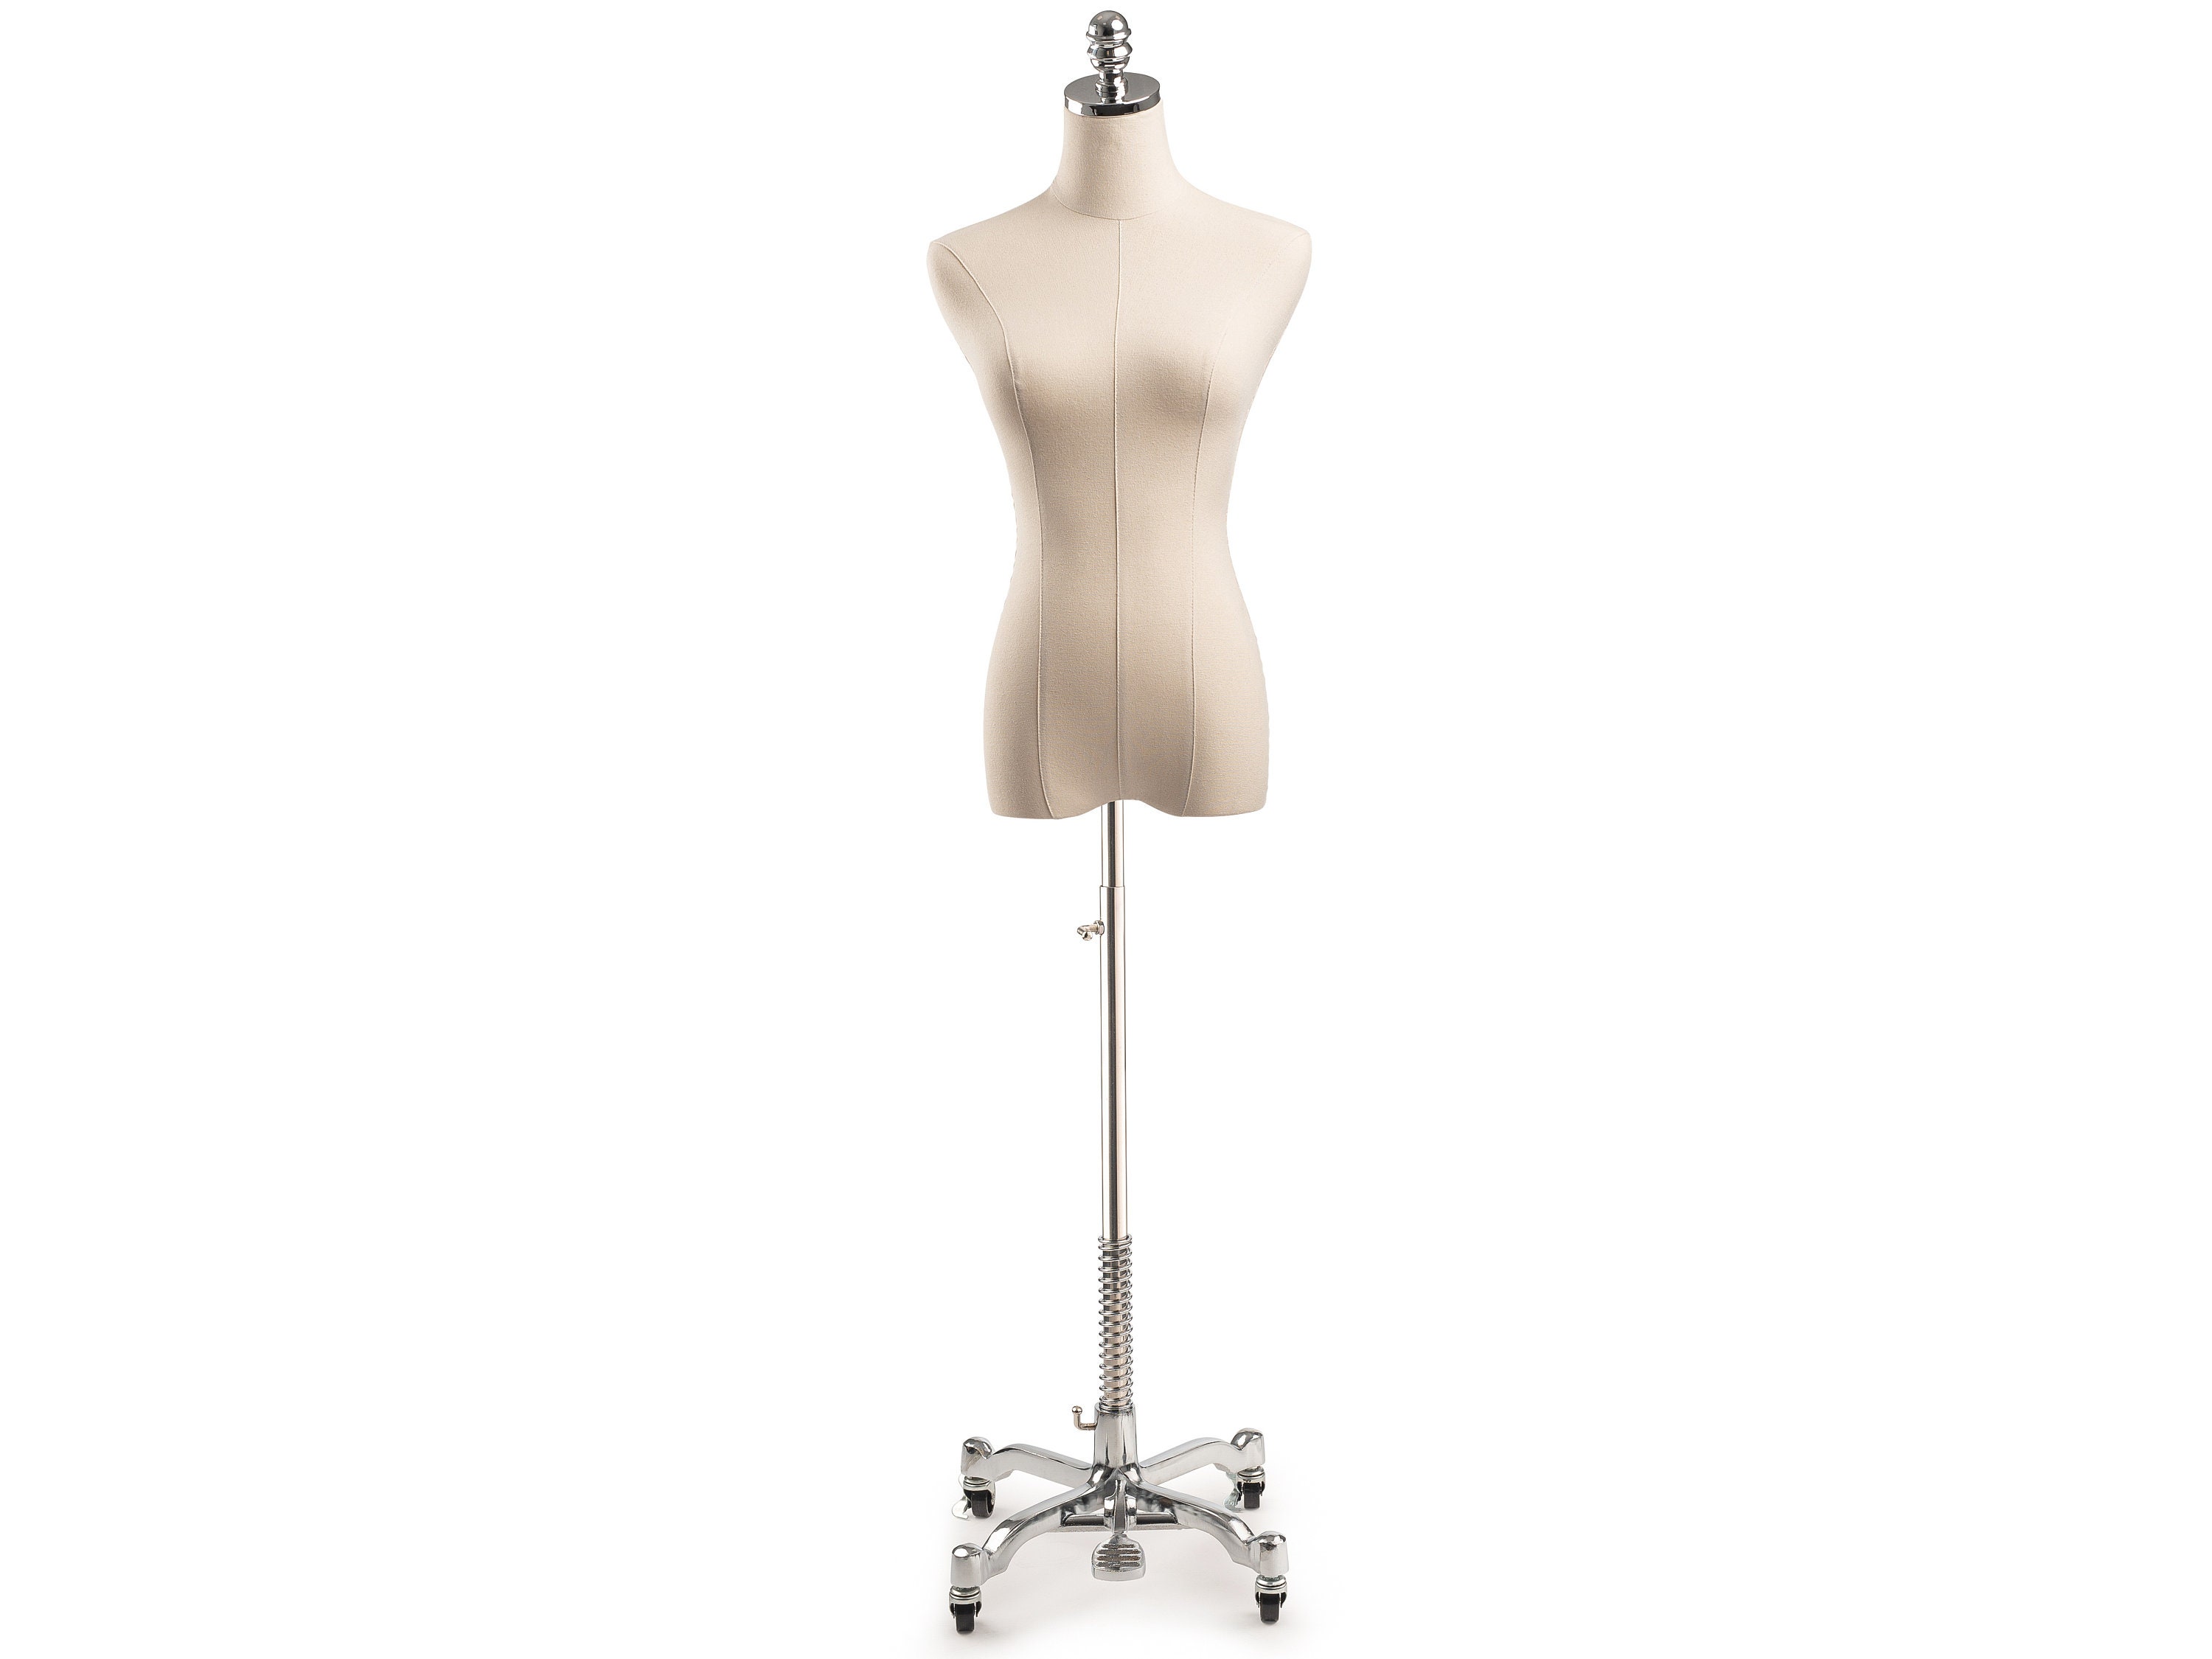 Professional Dress Forms - Over 25,000 Happy Customers, TSC